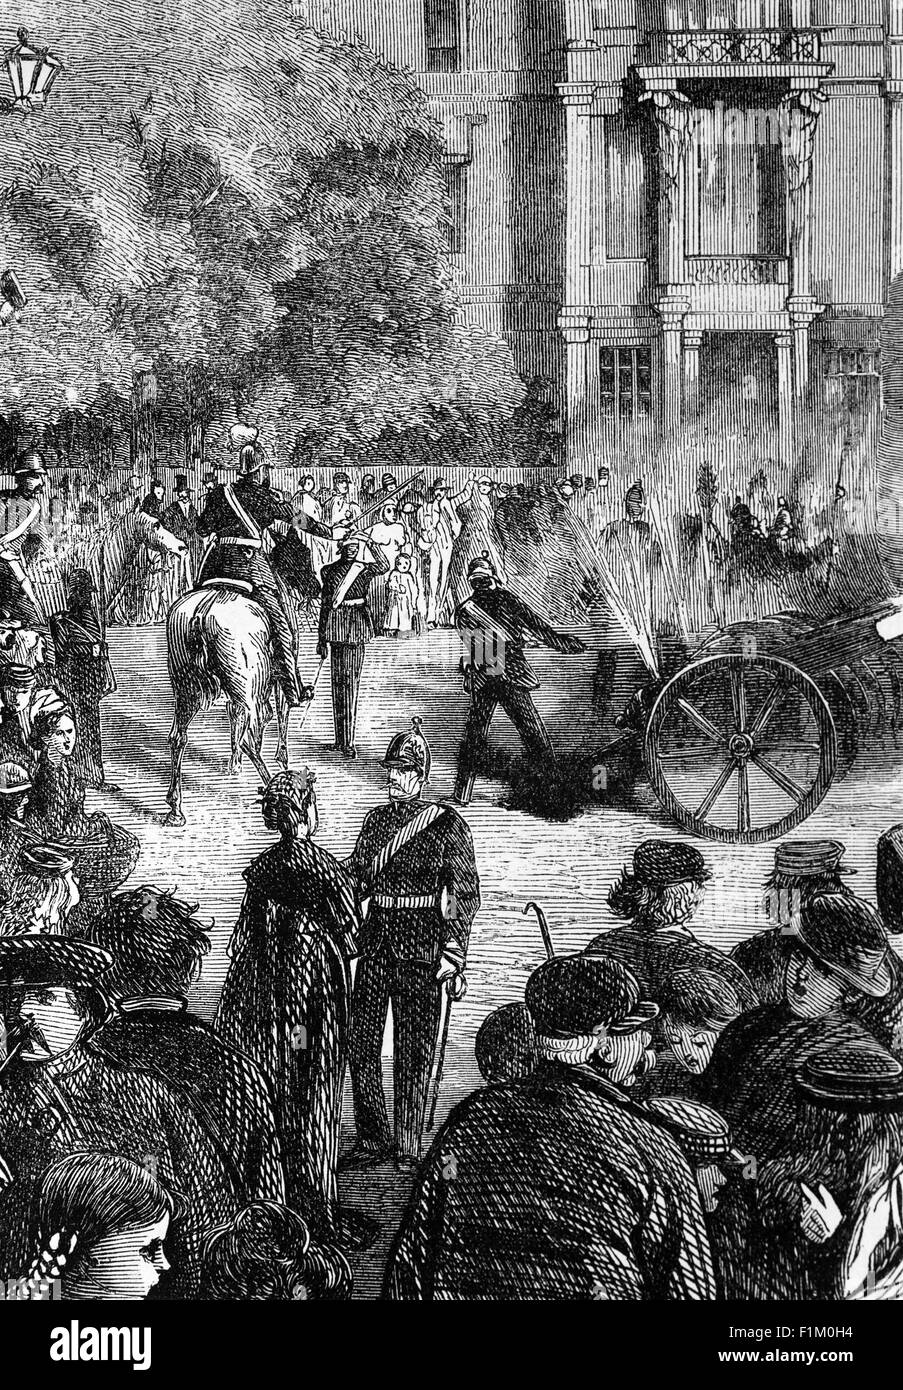 Firing Cannon Salvos during 19th Century celebrations in Berlin at the end of the Franco-German War of 1870-1871.  A conflict primarily  caused primarily by France's determination to restore its dominant position in continental Europe, which it had lost following Prussia's crushing victory over Austria in 1866. Stock Photo